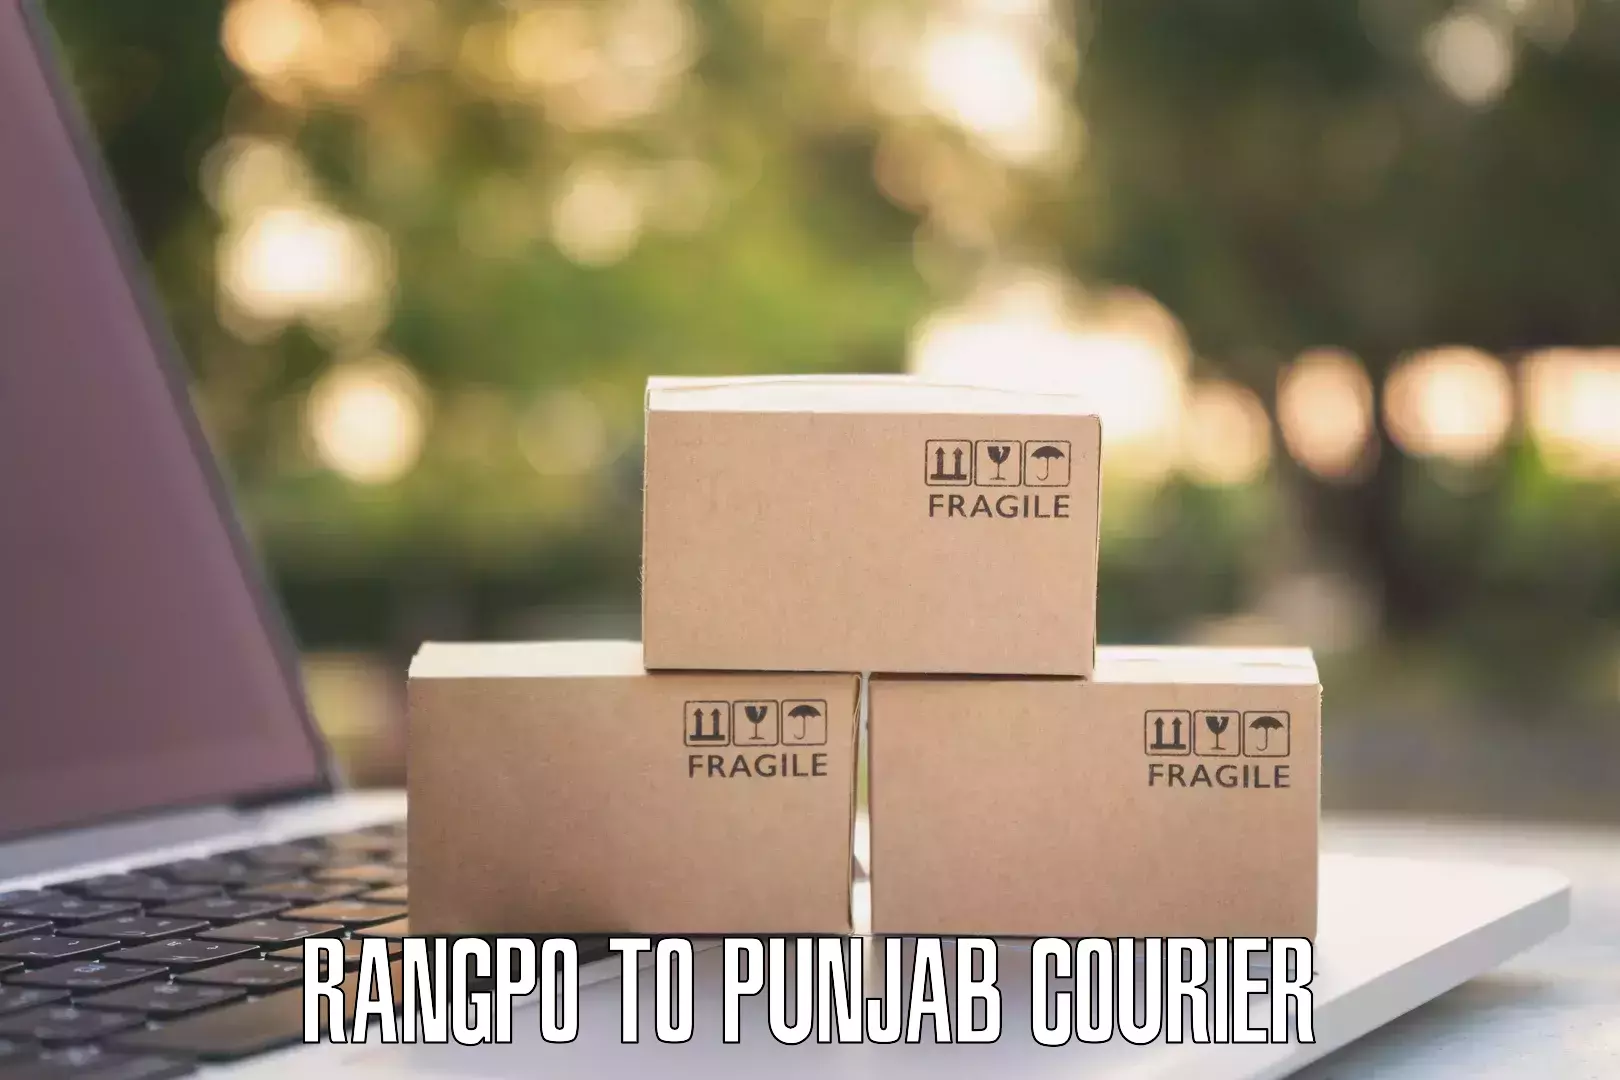 Round-the-clock parcel delivery Rangpo to Punjab